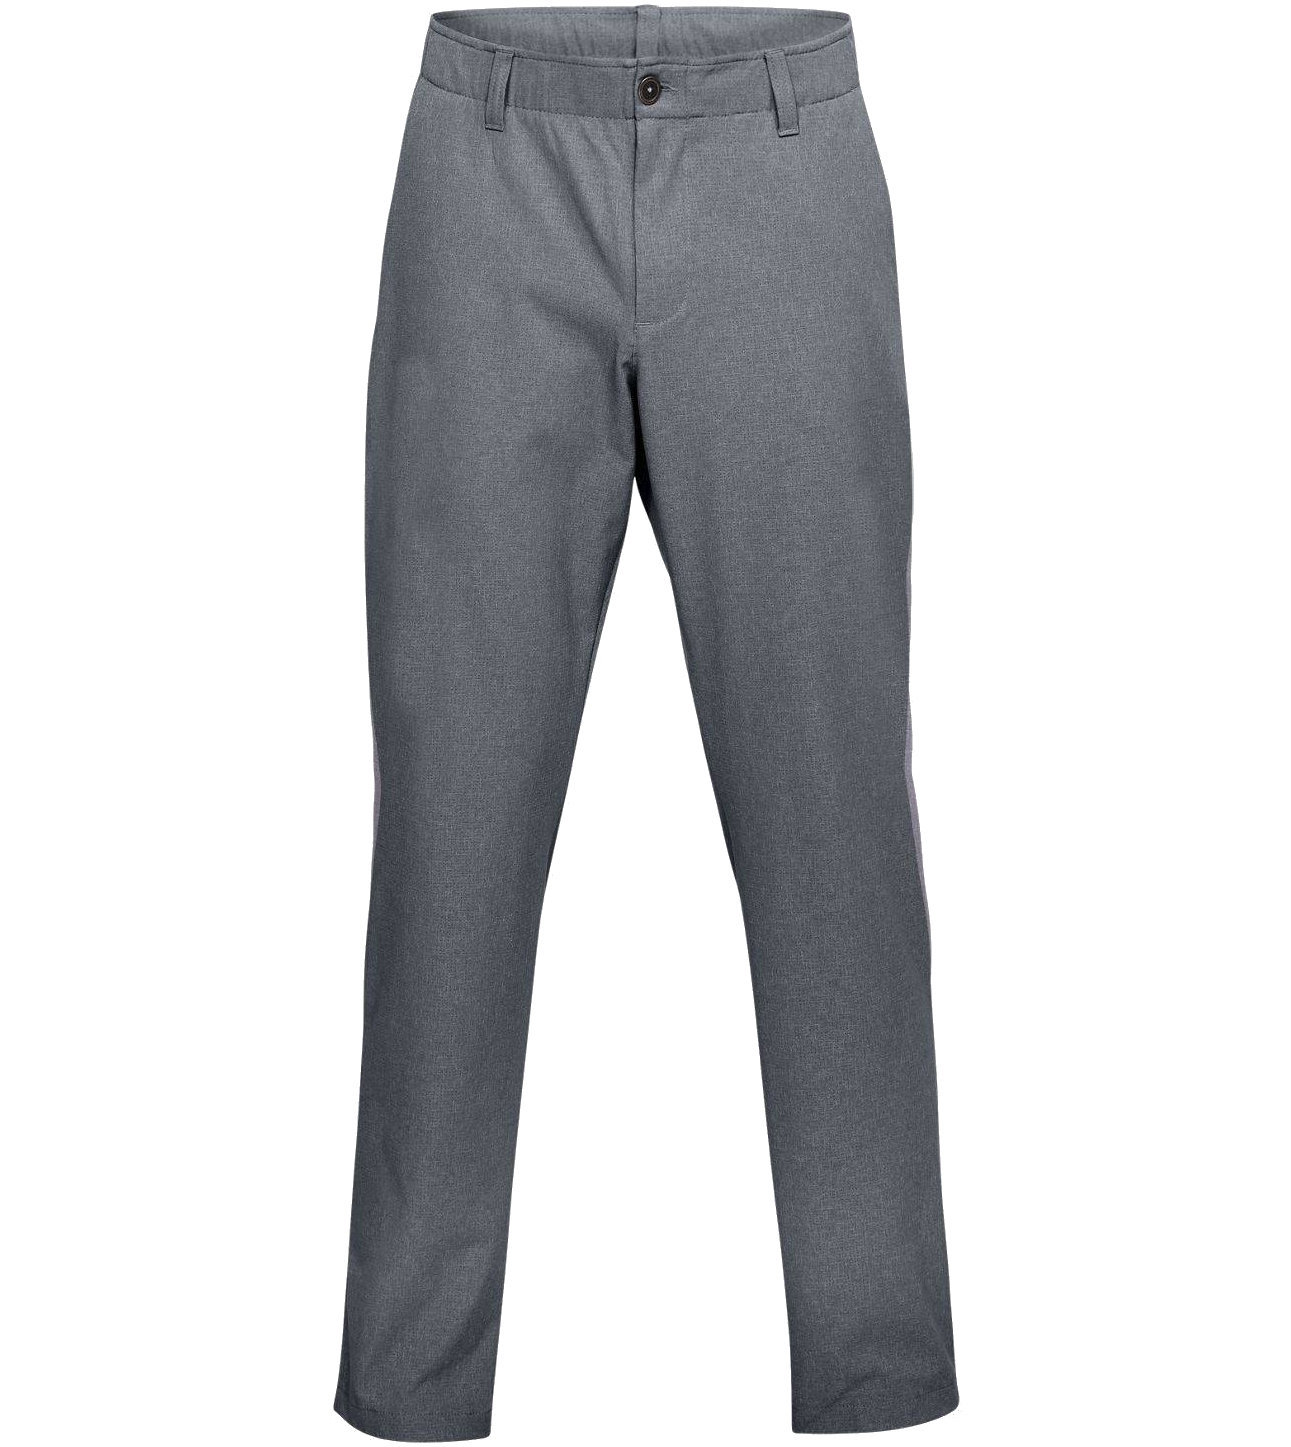 Trousers Under Armour Showdown Vent Taper Gray 30/32